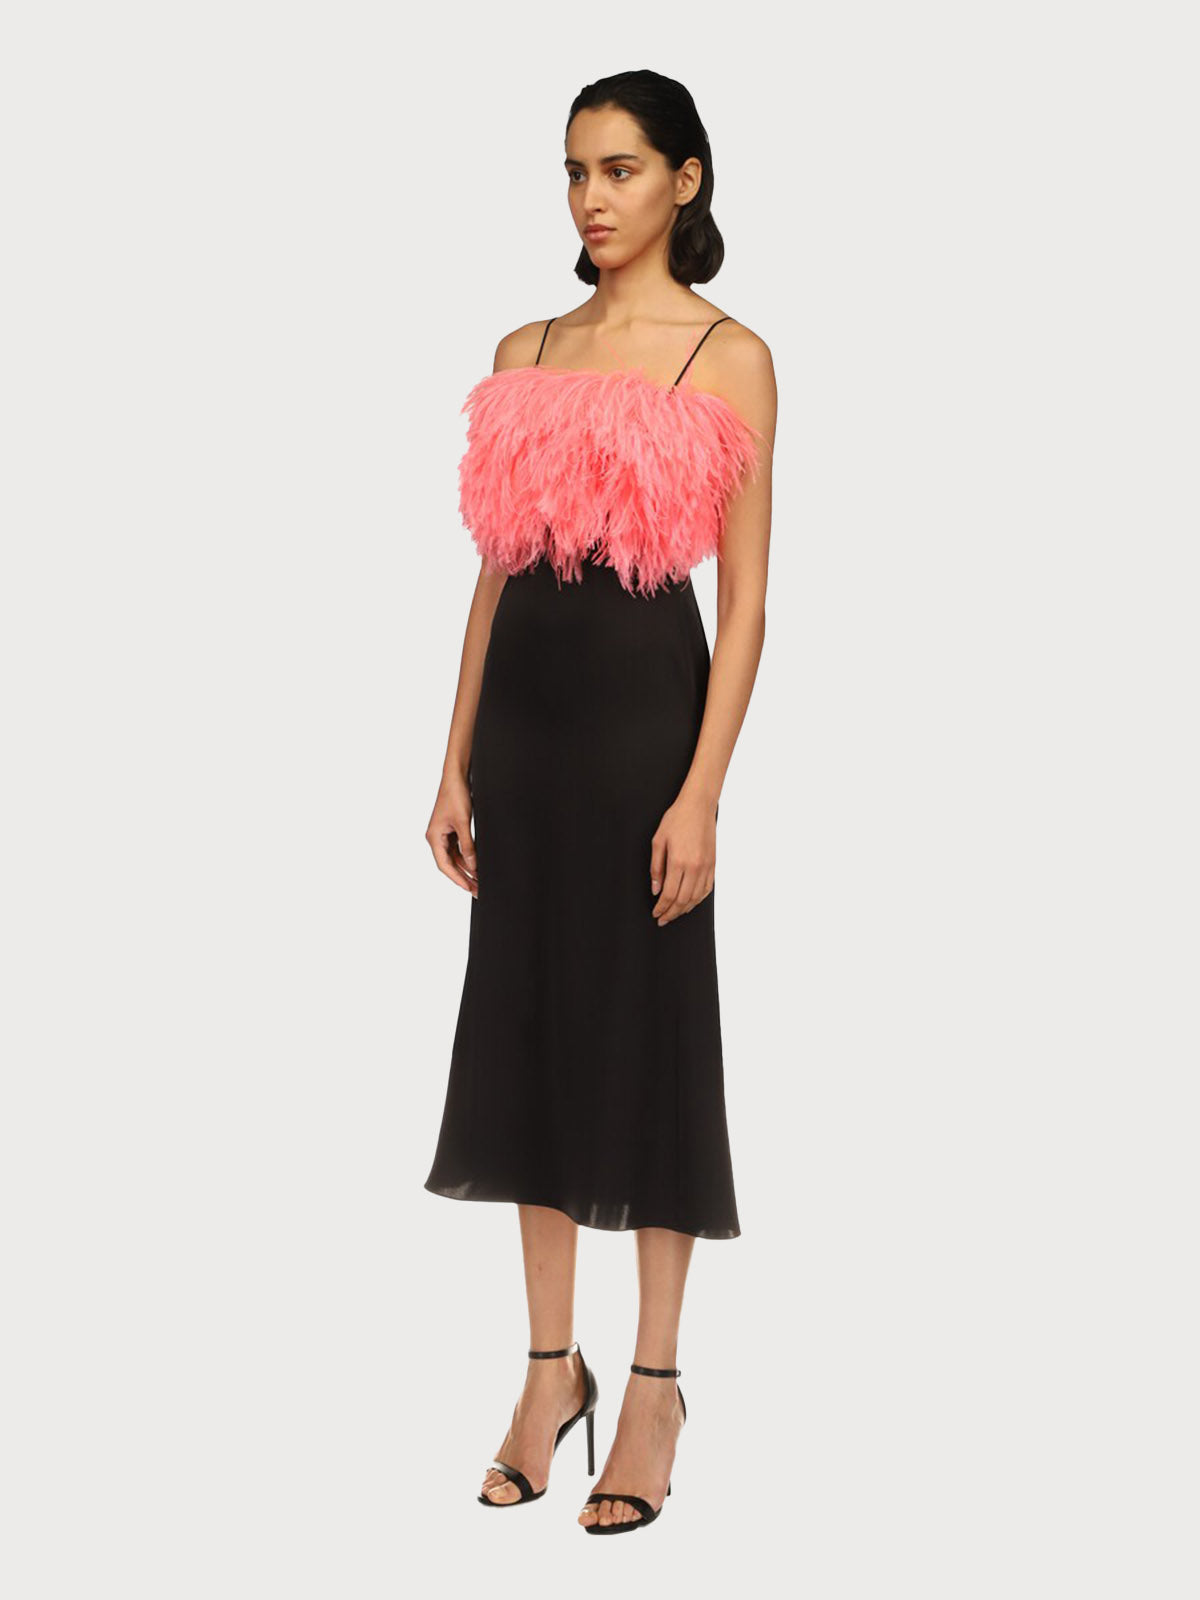 Satin Dress with Pink Feathers